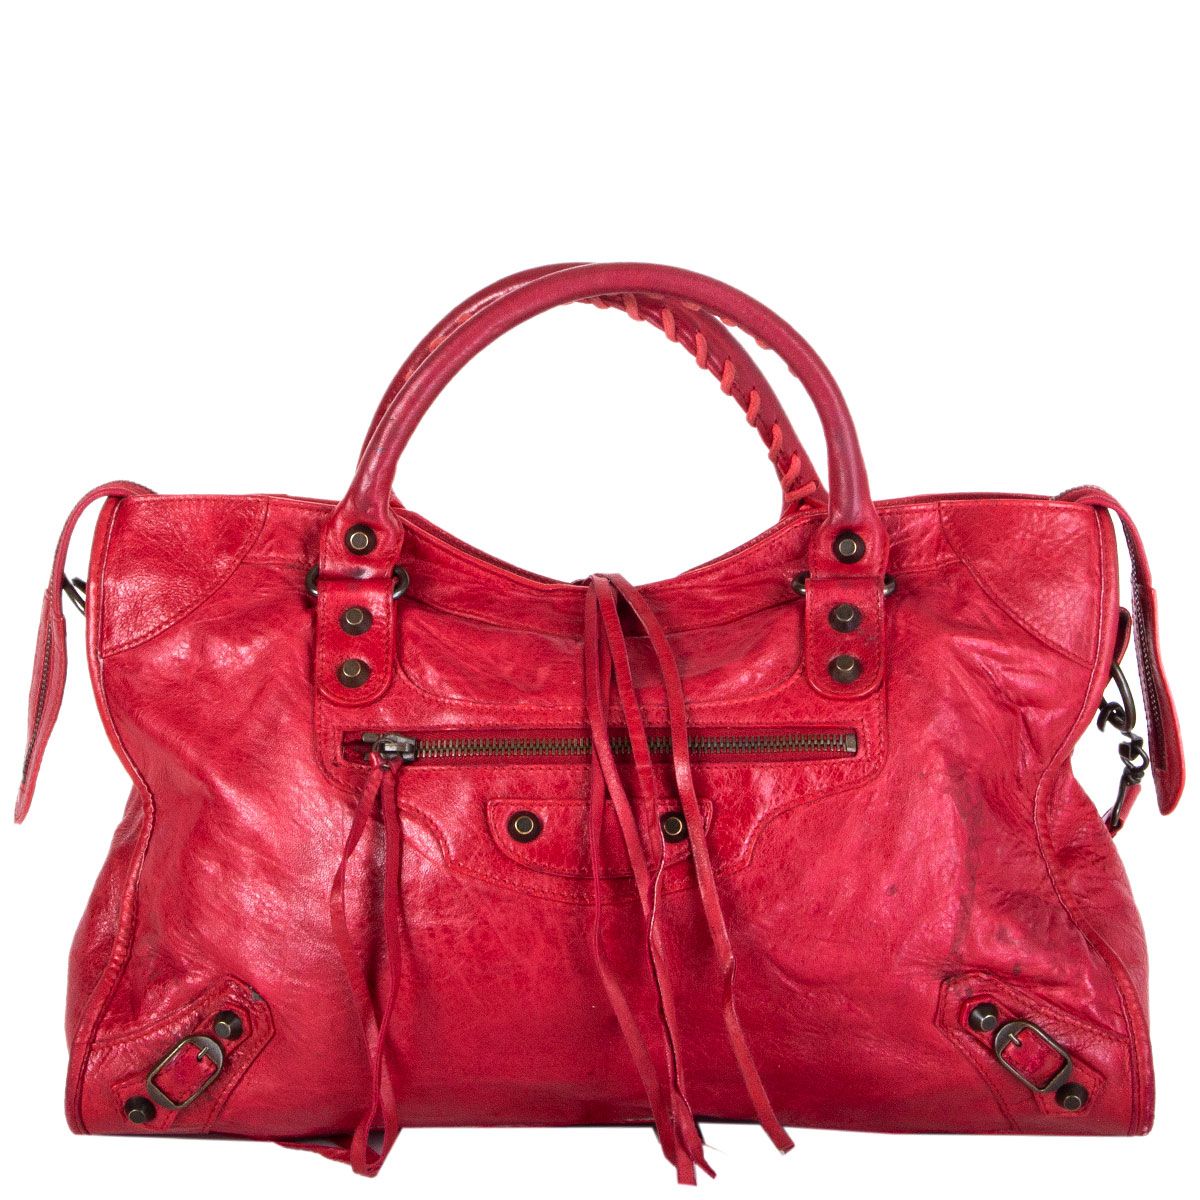 BALENCIAGA City bag in red aged leather  VALOIS VINTAGE PARIS